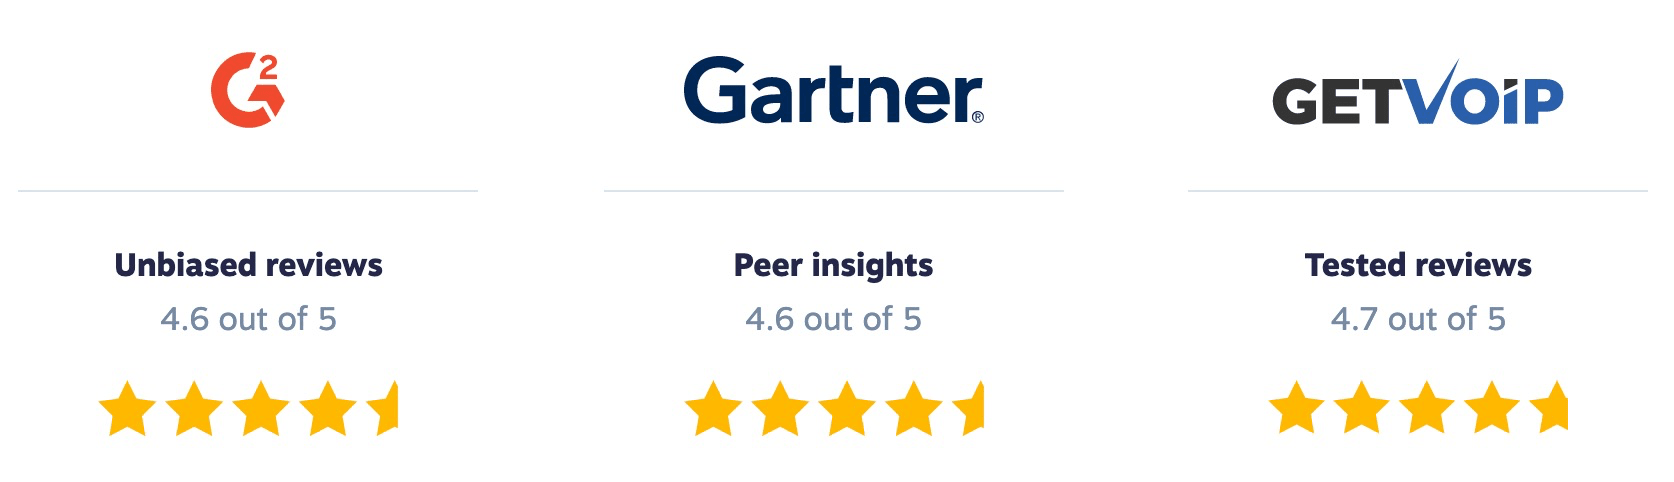 Nextiva reviews and ratings - G2 (4.6/5), Gartner Peerinsights (4.6/5), and GetVoIP (4.7/5).